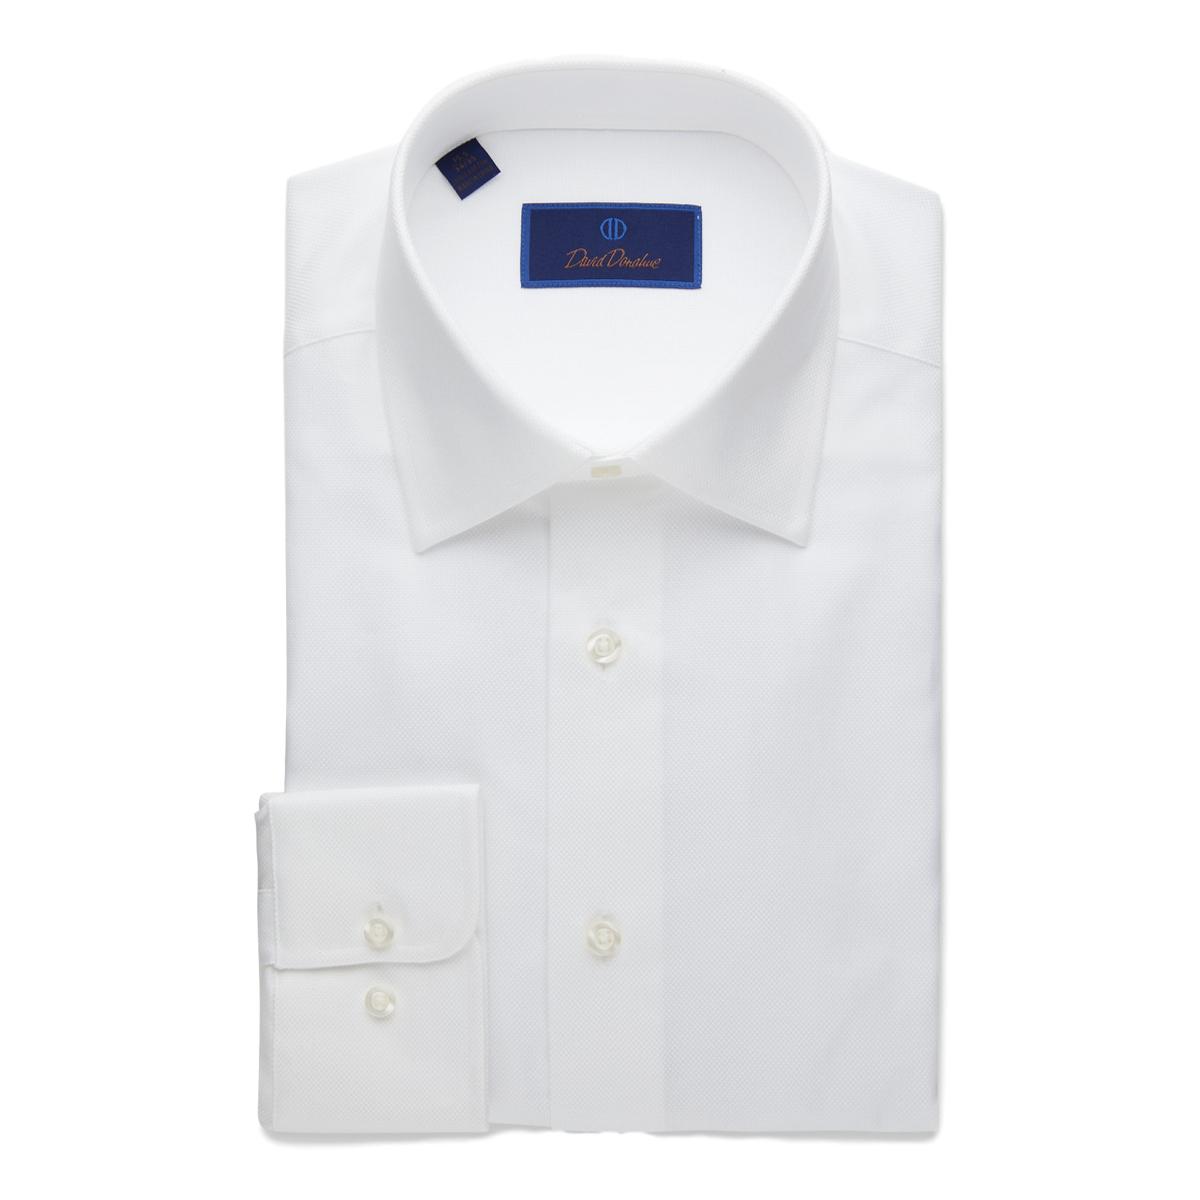 All Cotton Royal Oxford Dress shirt - Family Britches